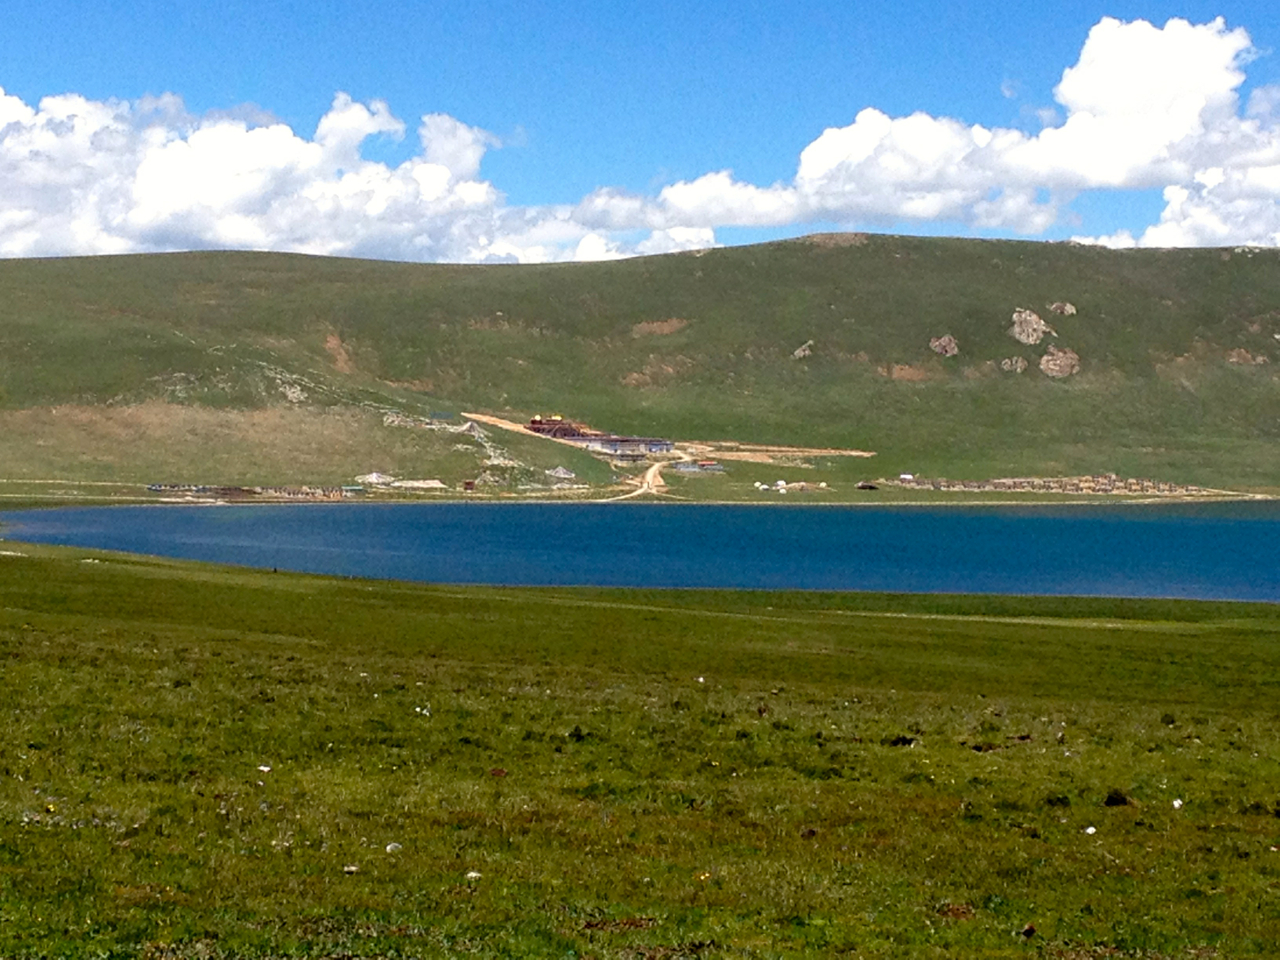 Ayang Gompa and Clinic across the Lake of Compassion, Eastern Tibet